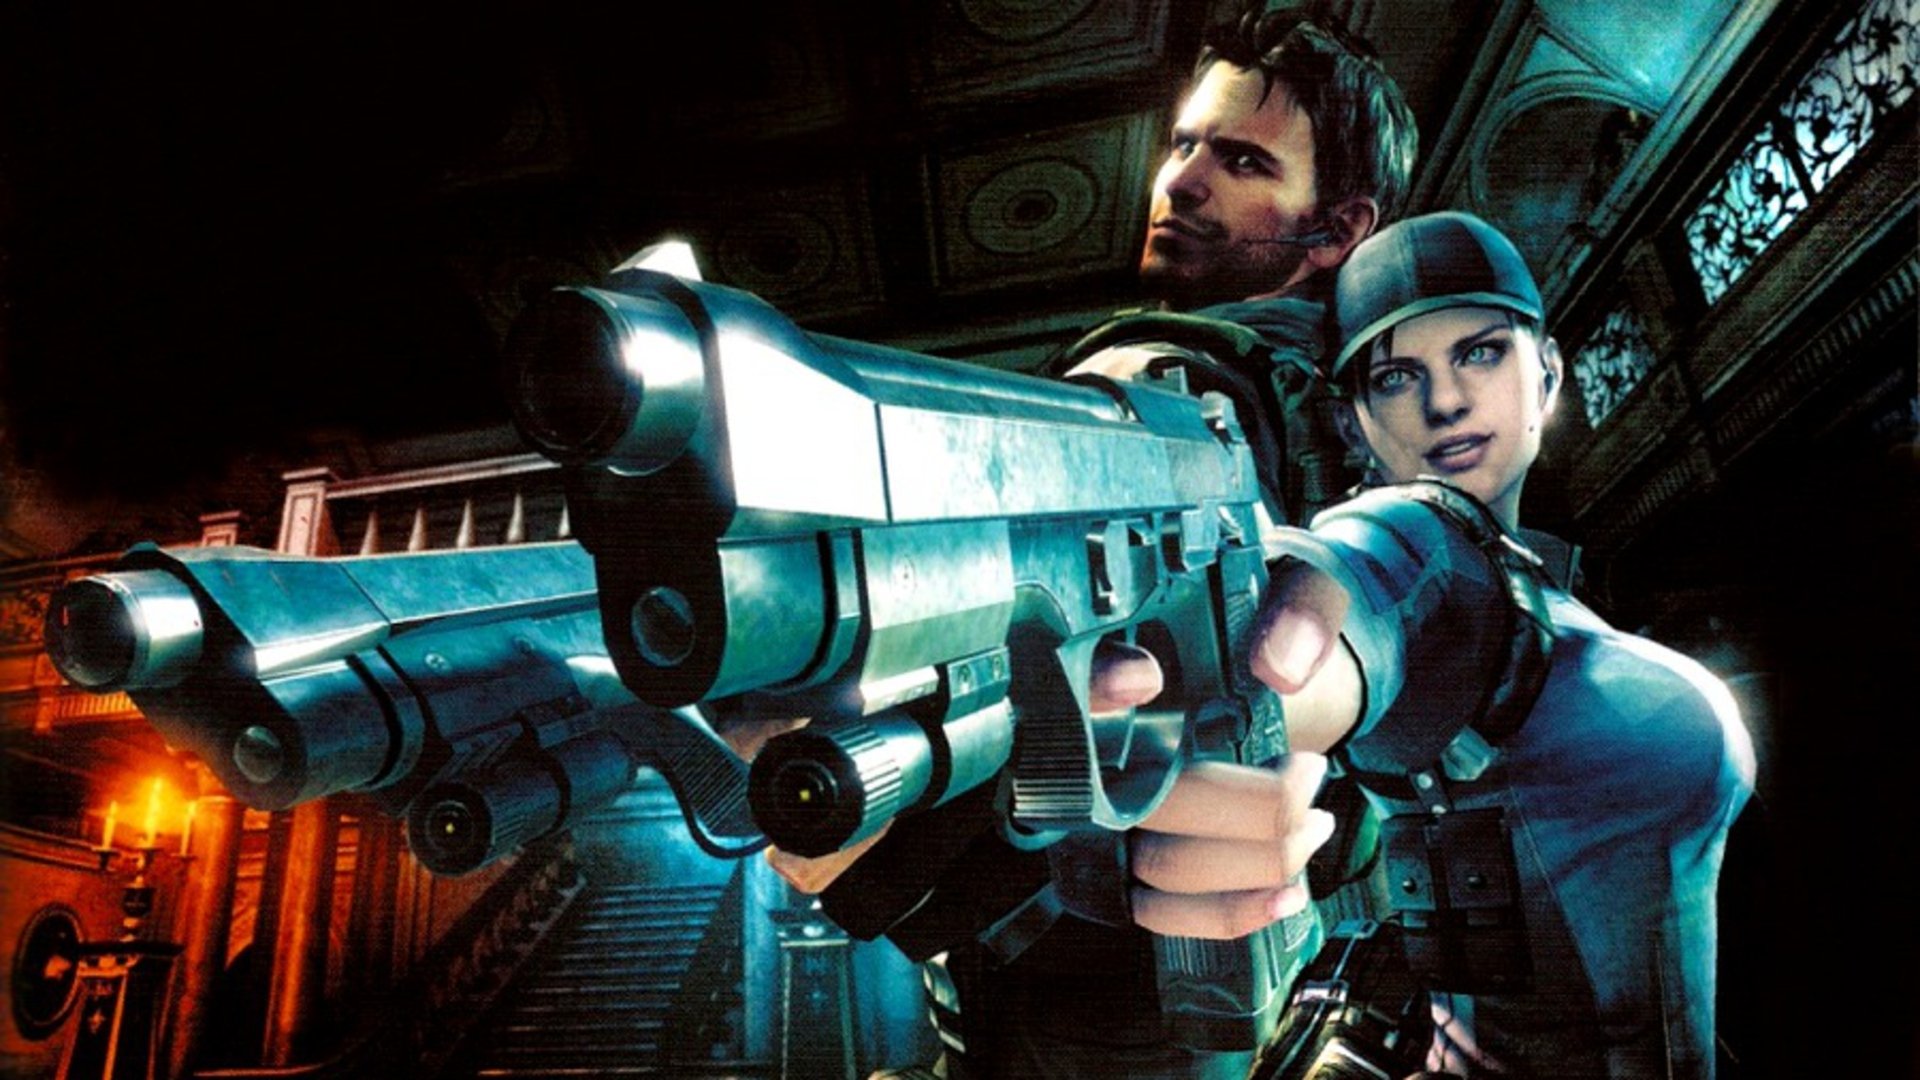 Resident Evil 5 Full HD Wallpaper and Background Image | 1920x1080 | ID